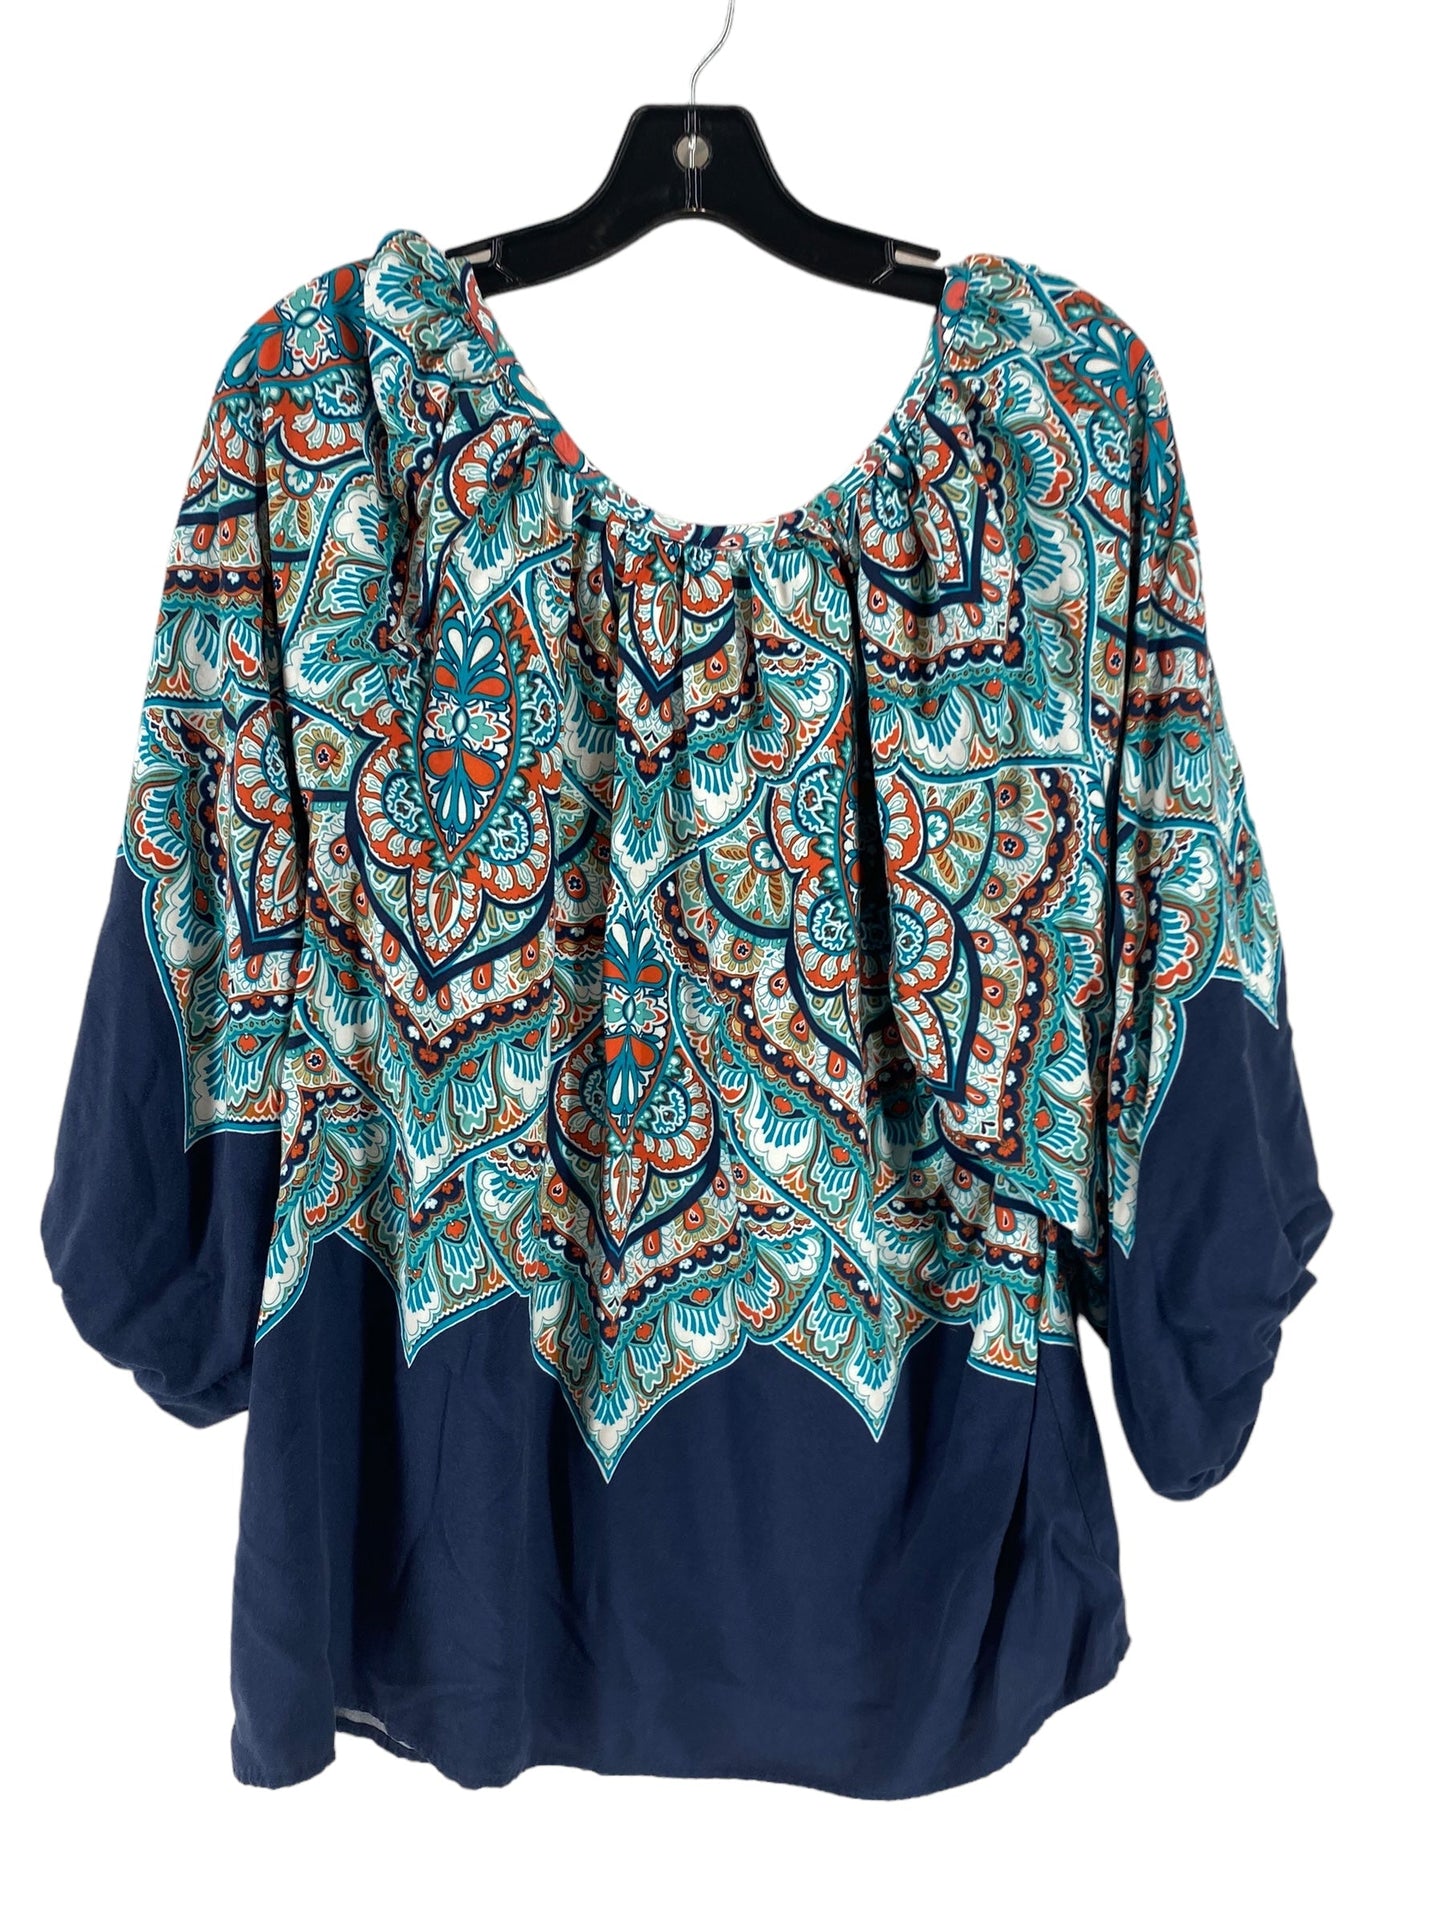 Blue Top 3/4 Sleeve Ruby Rd, Size 1x